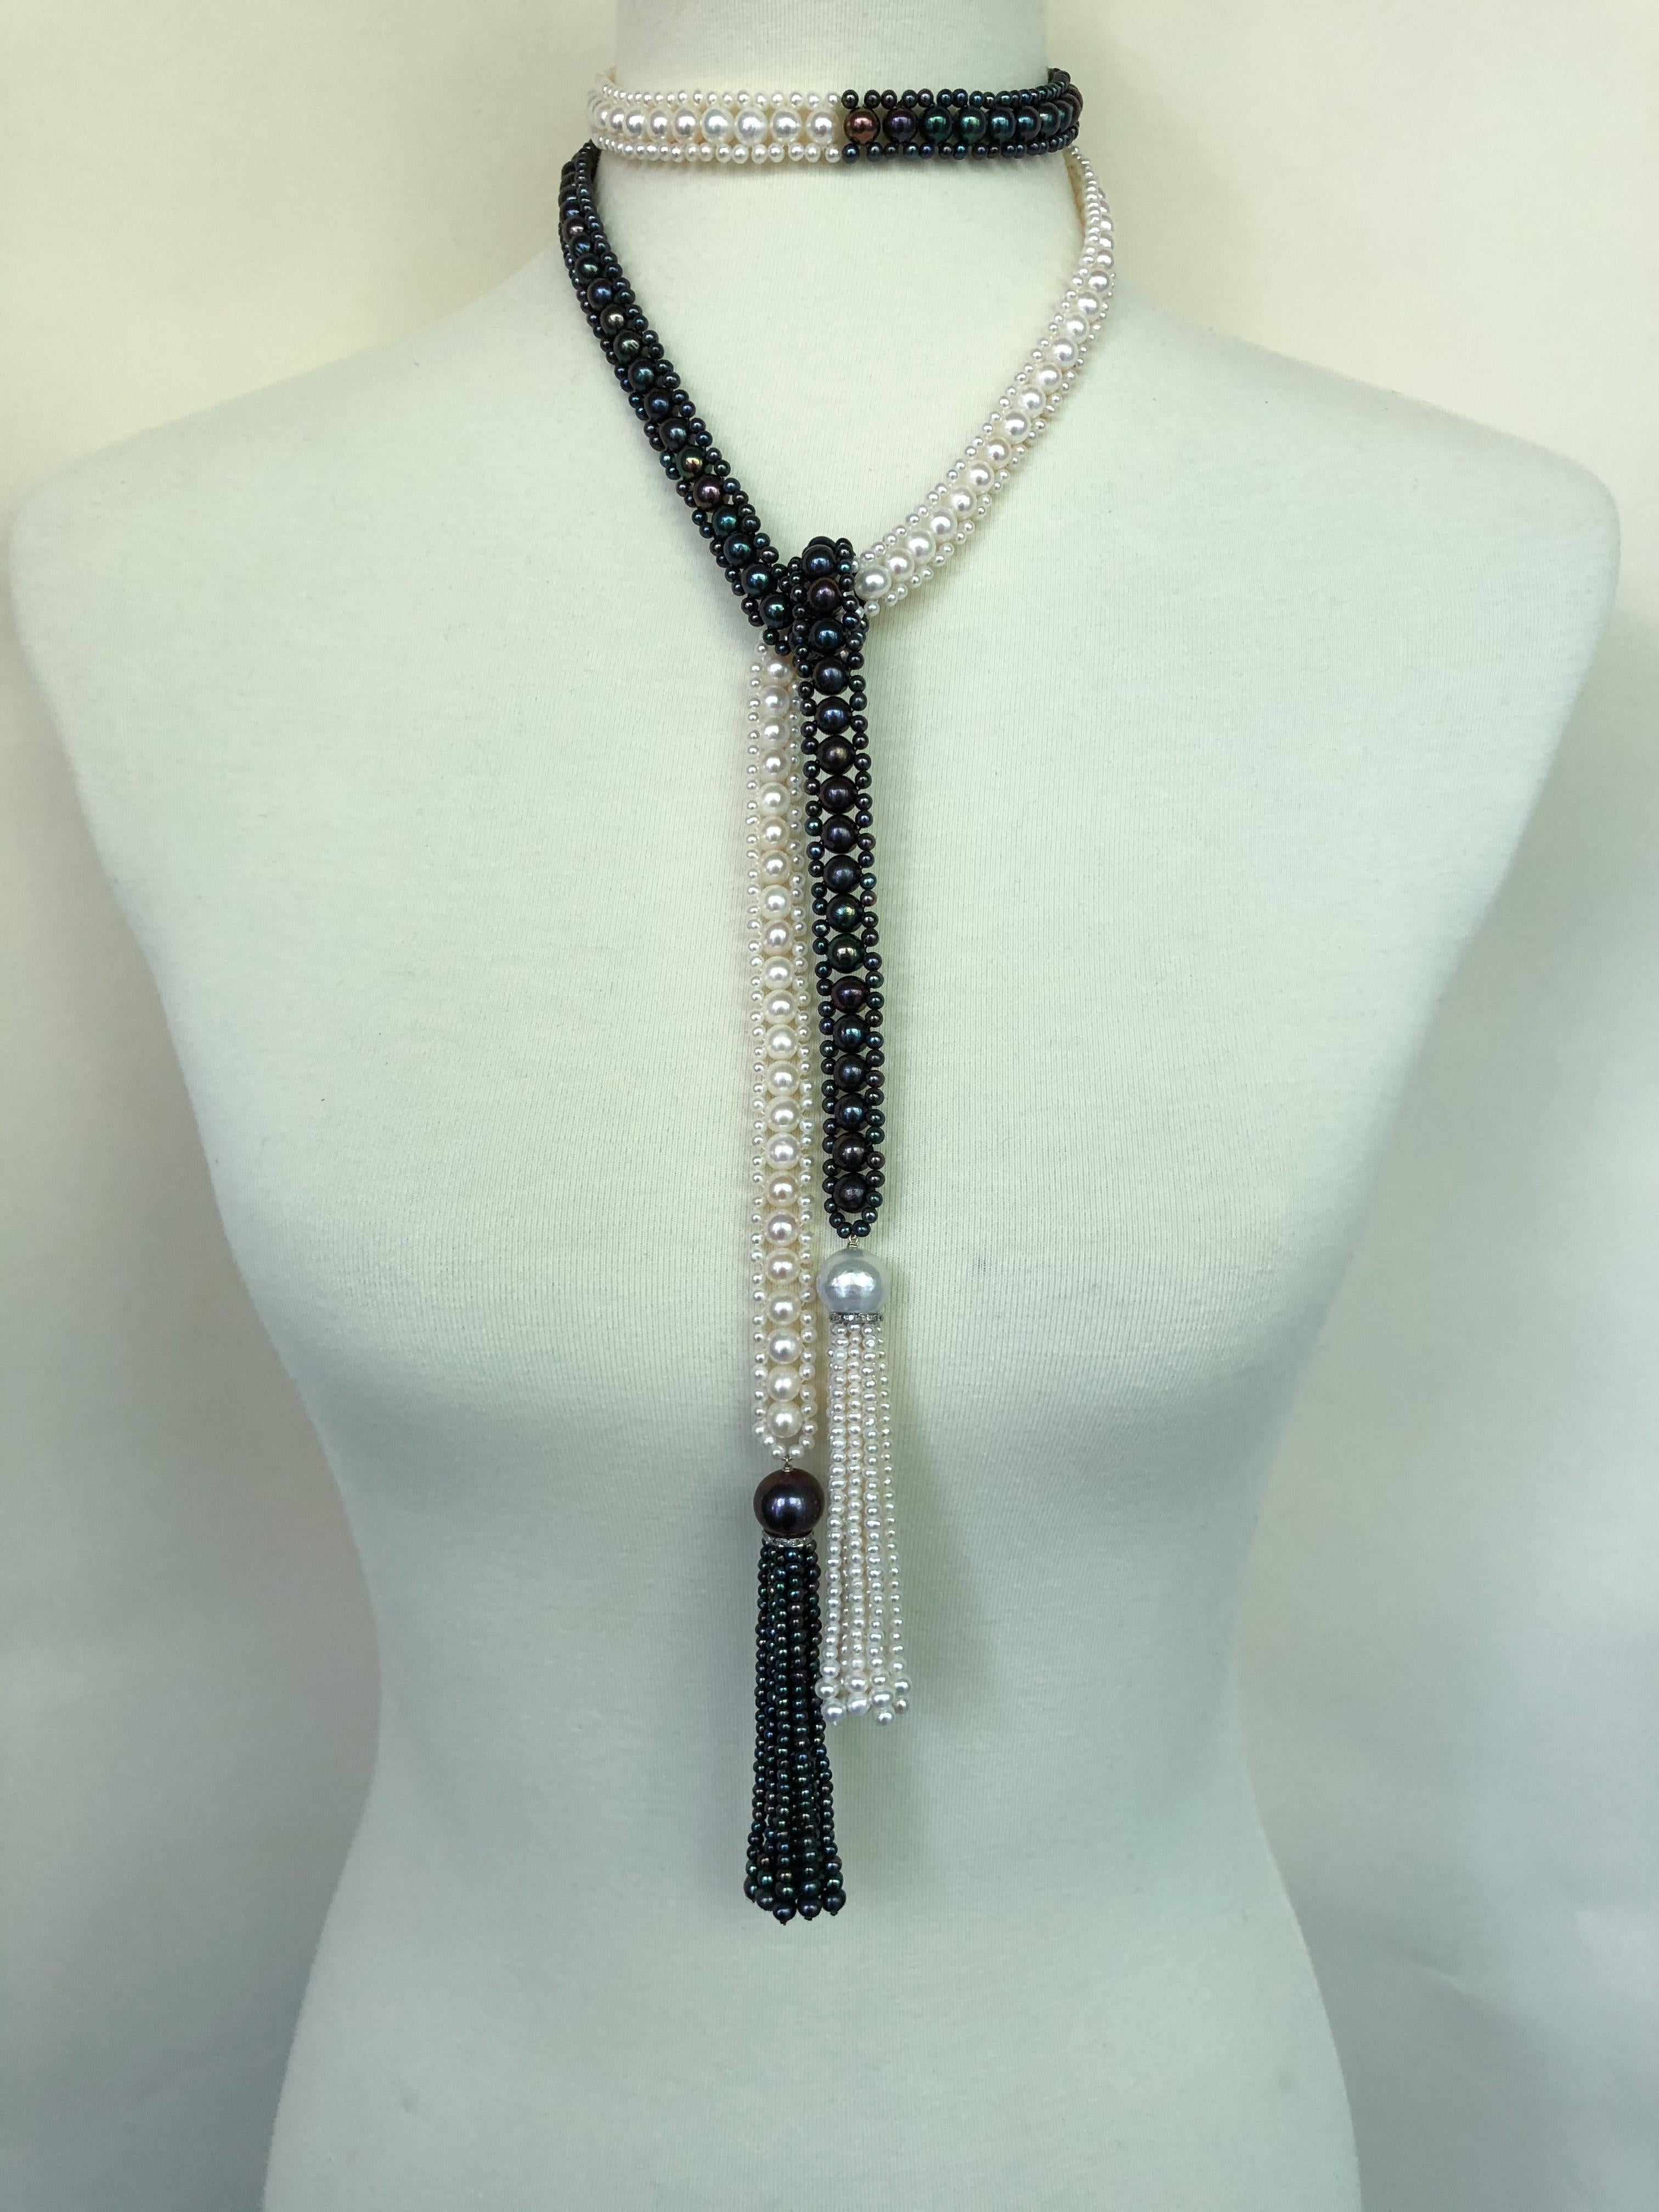 Women's Marina J. Long Woven Black and White Pearl Sautoir Necklace in Art Deco Style